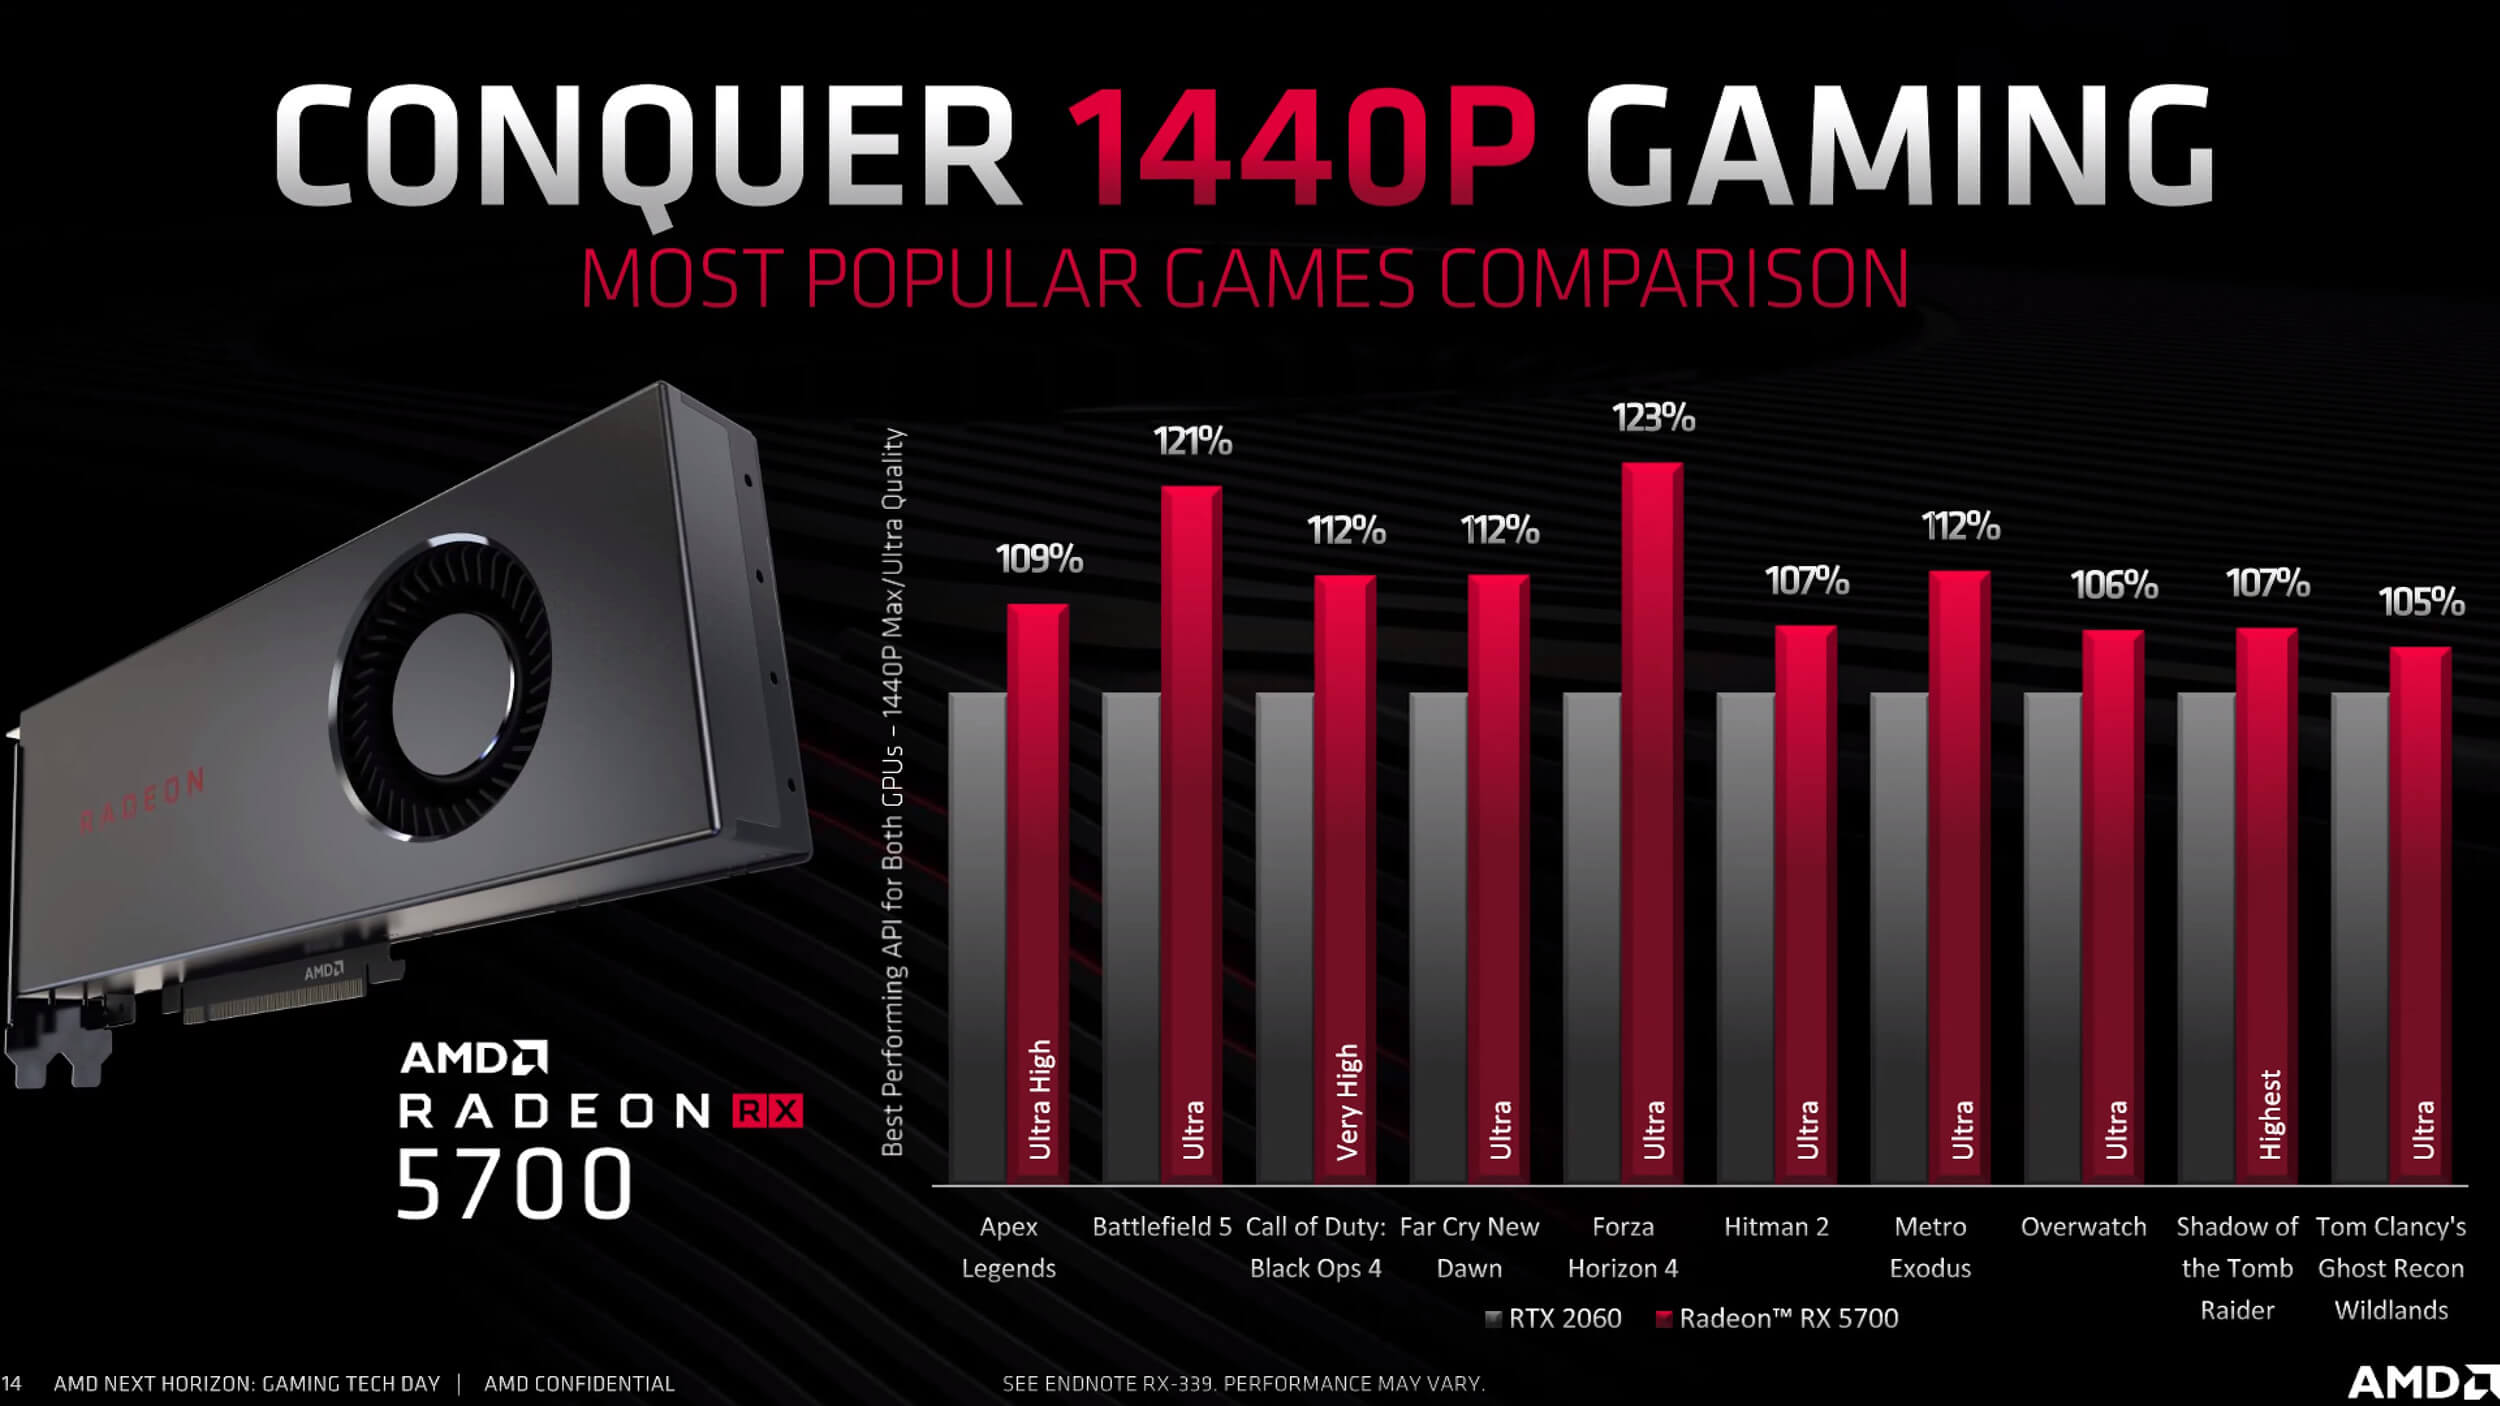 Conquer 1440p Gaming with AMD Radeon